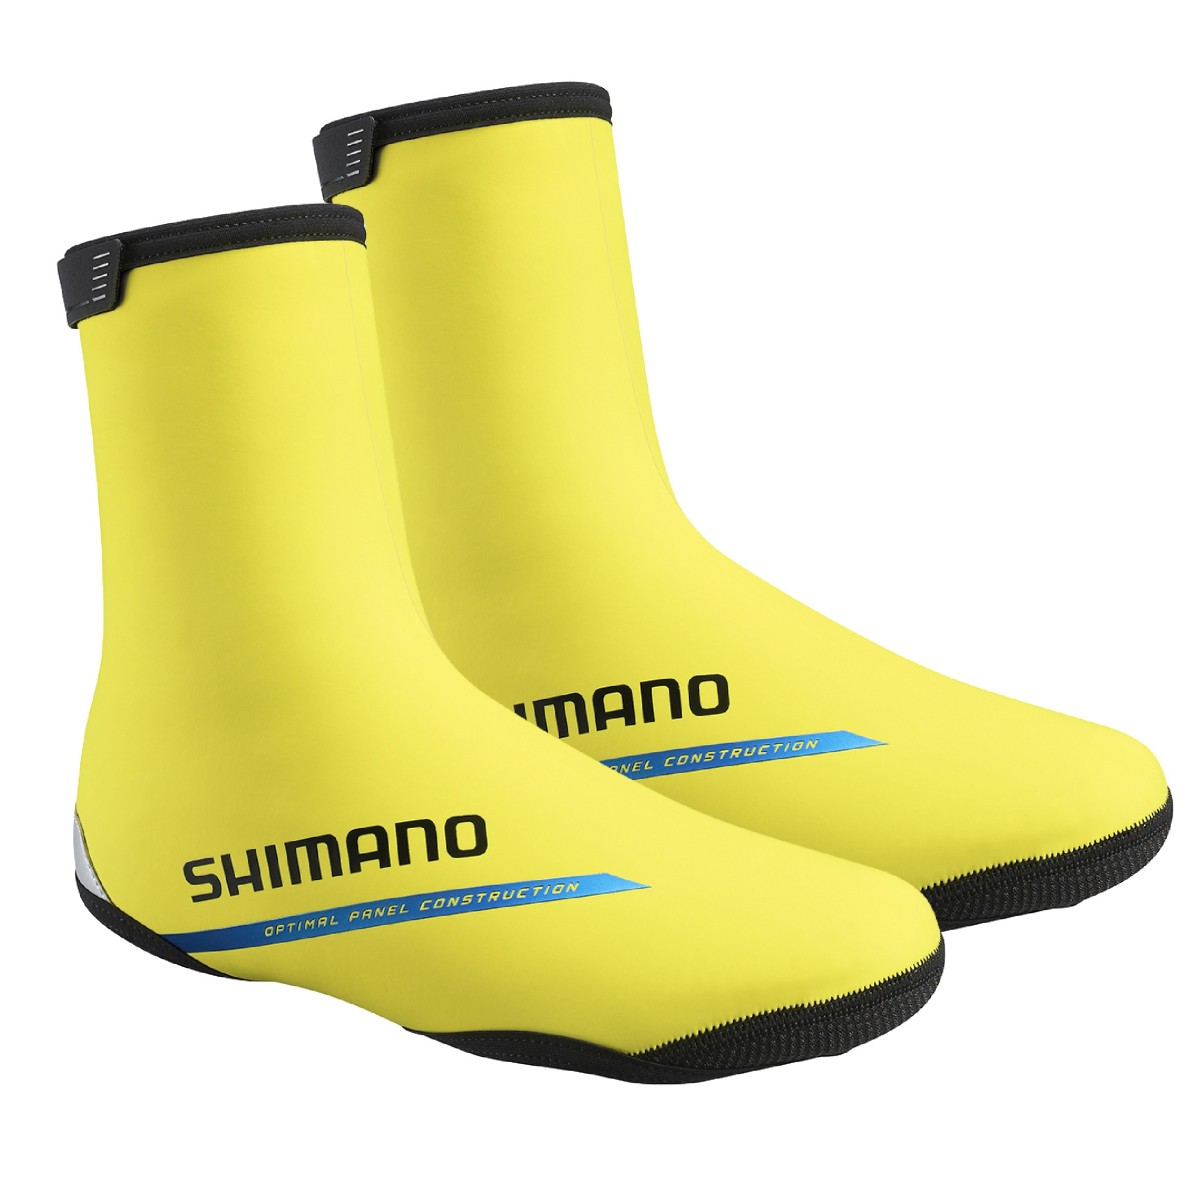 shoecovers Shimano ROAD THERMAL fluo